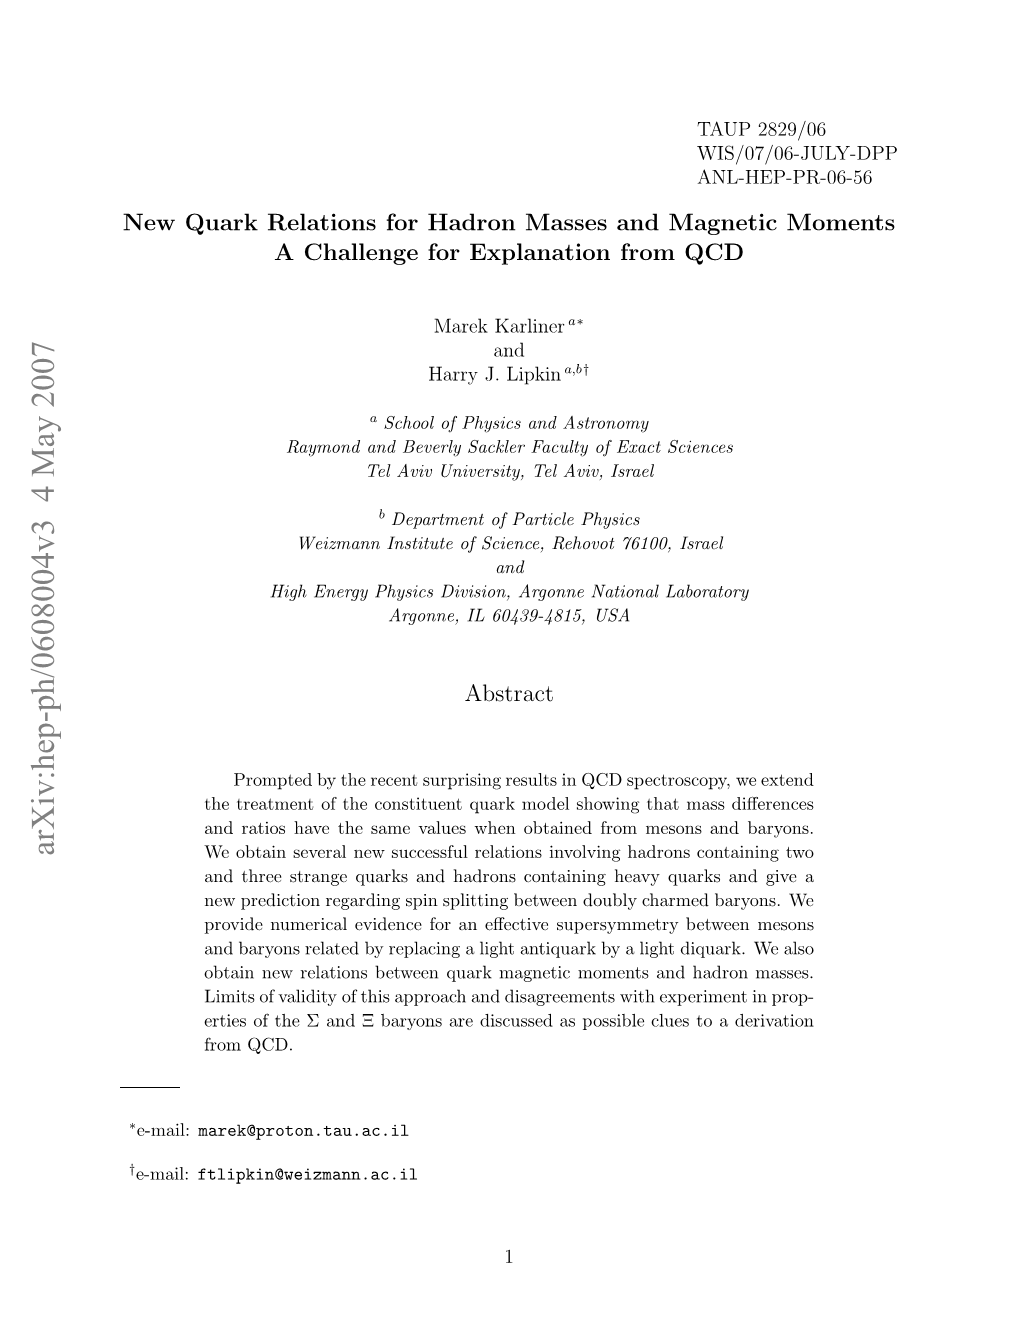 New Quark Relations for Hadron Masses and Magnetic Moments-A